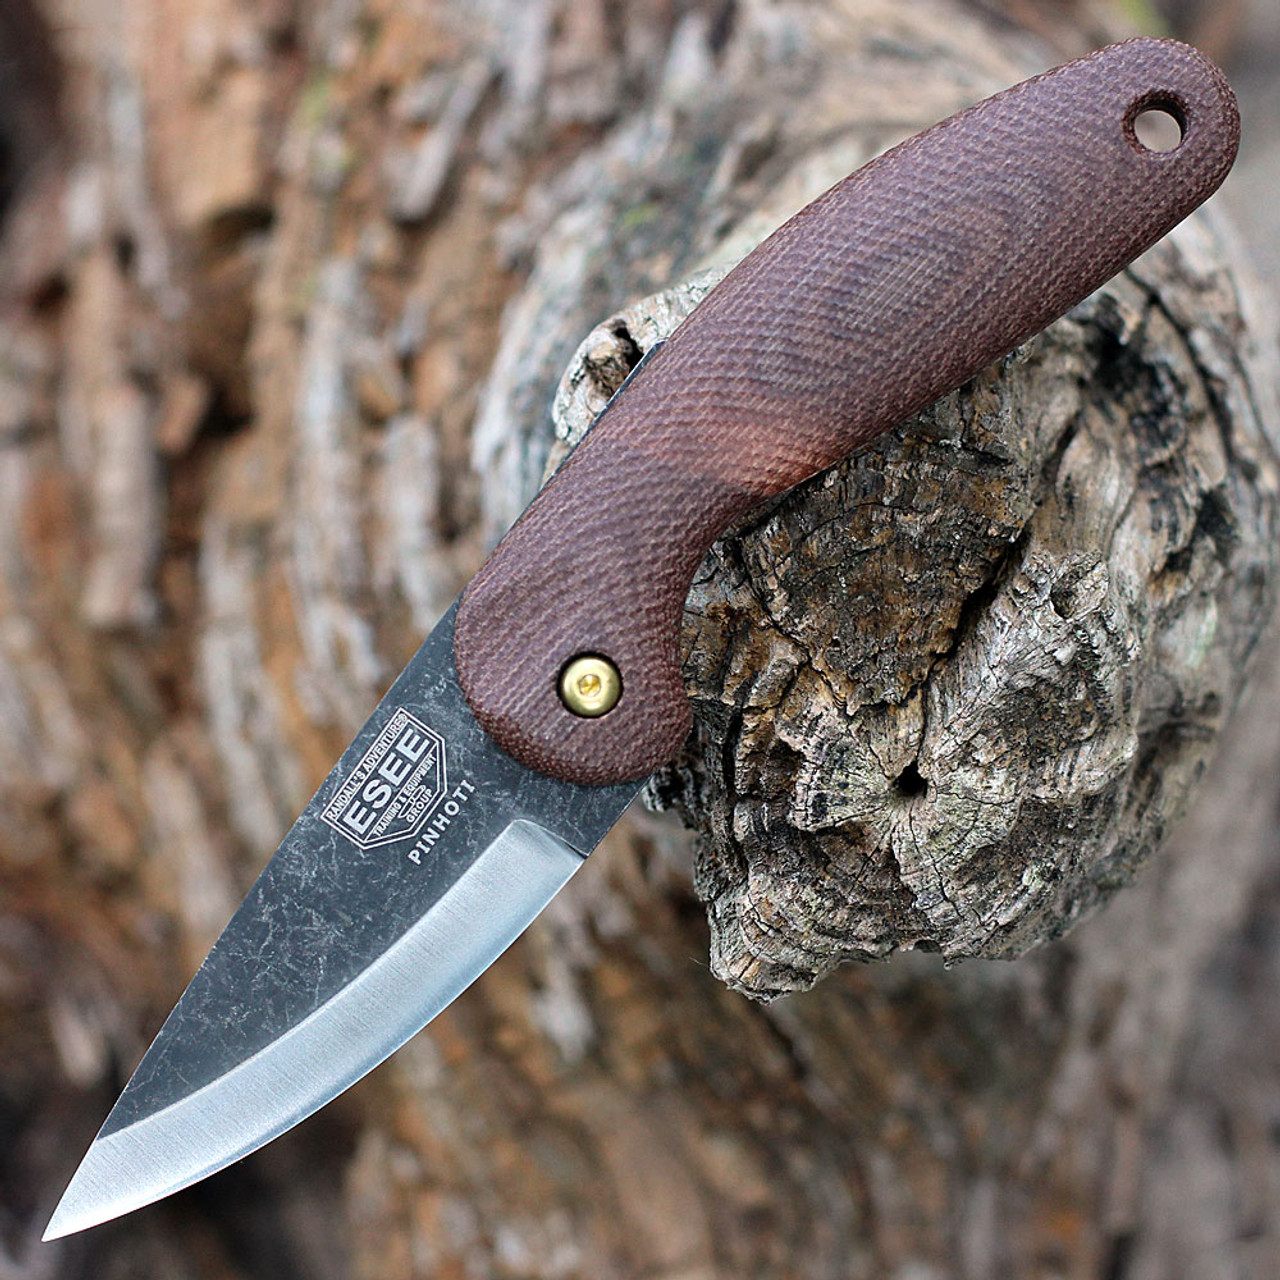 ESEE Knives Pinhoti Friction Folder - 3.25in 1095 Carbon Steel Tumble Black Oxide Scandi Style Blade, Brown Sculpted Micarta Handle